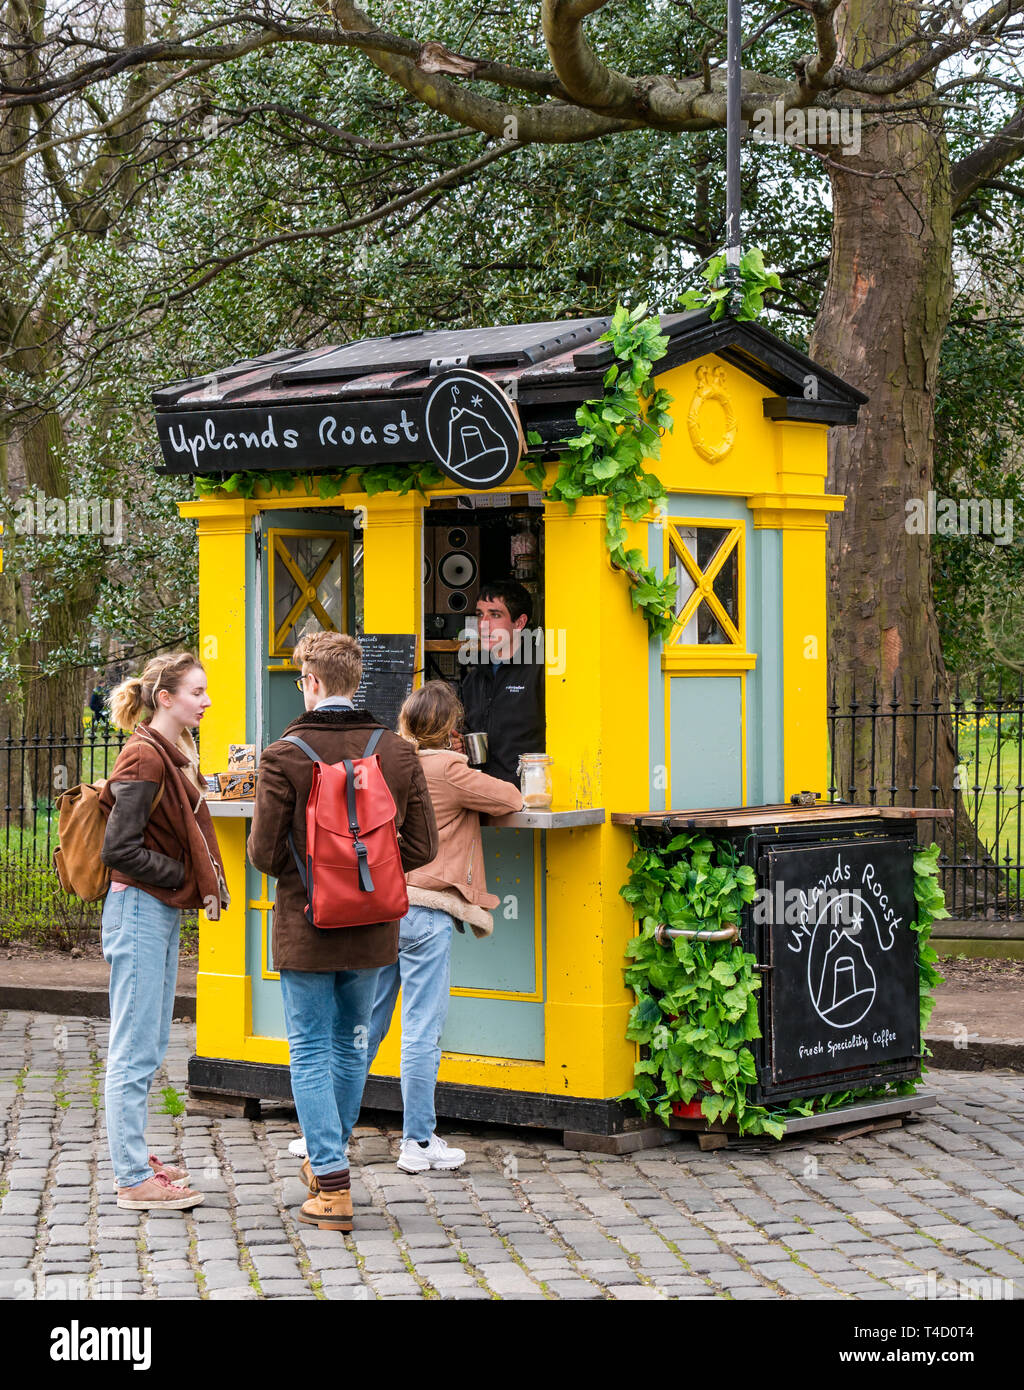 Students at takeaway coffee stall called Uplands Roast in converted police call box, George Square, Edinburgh, Scotland, UK Stock Photo